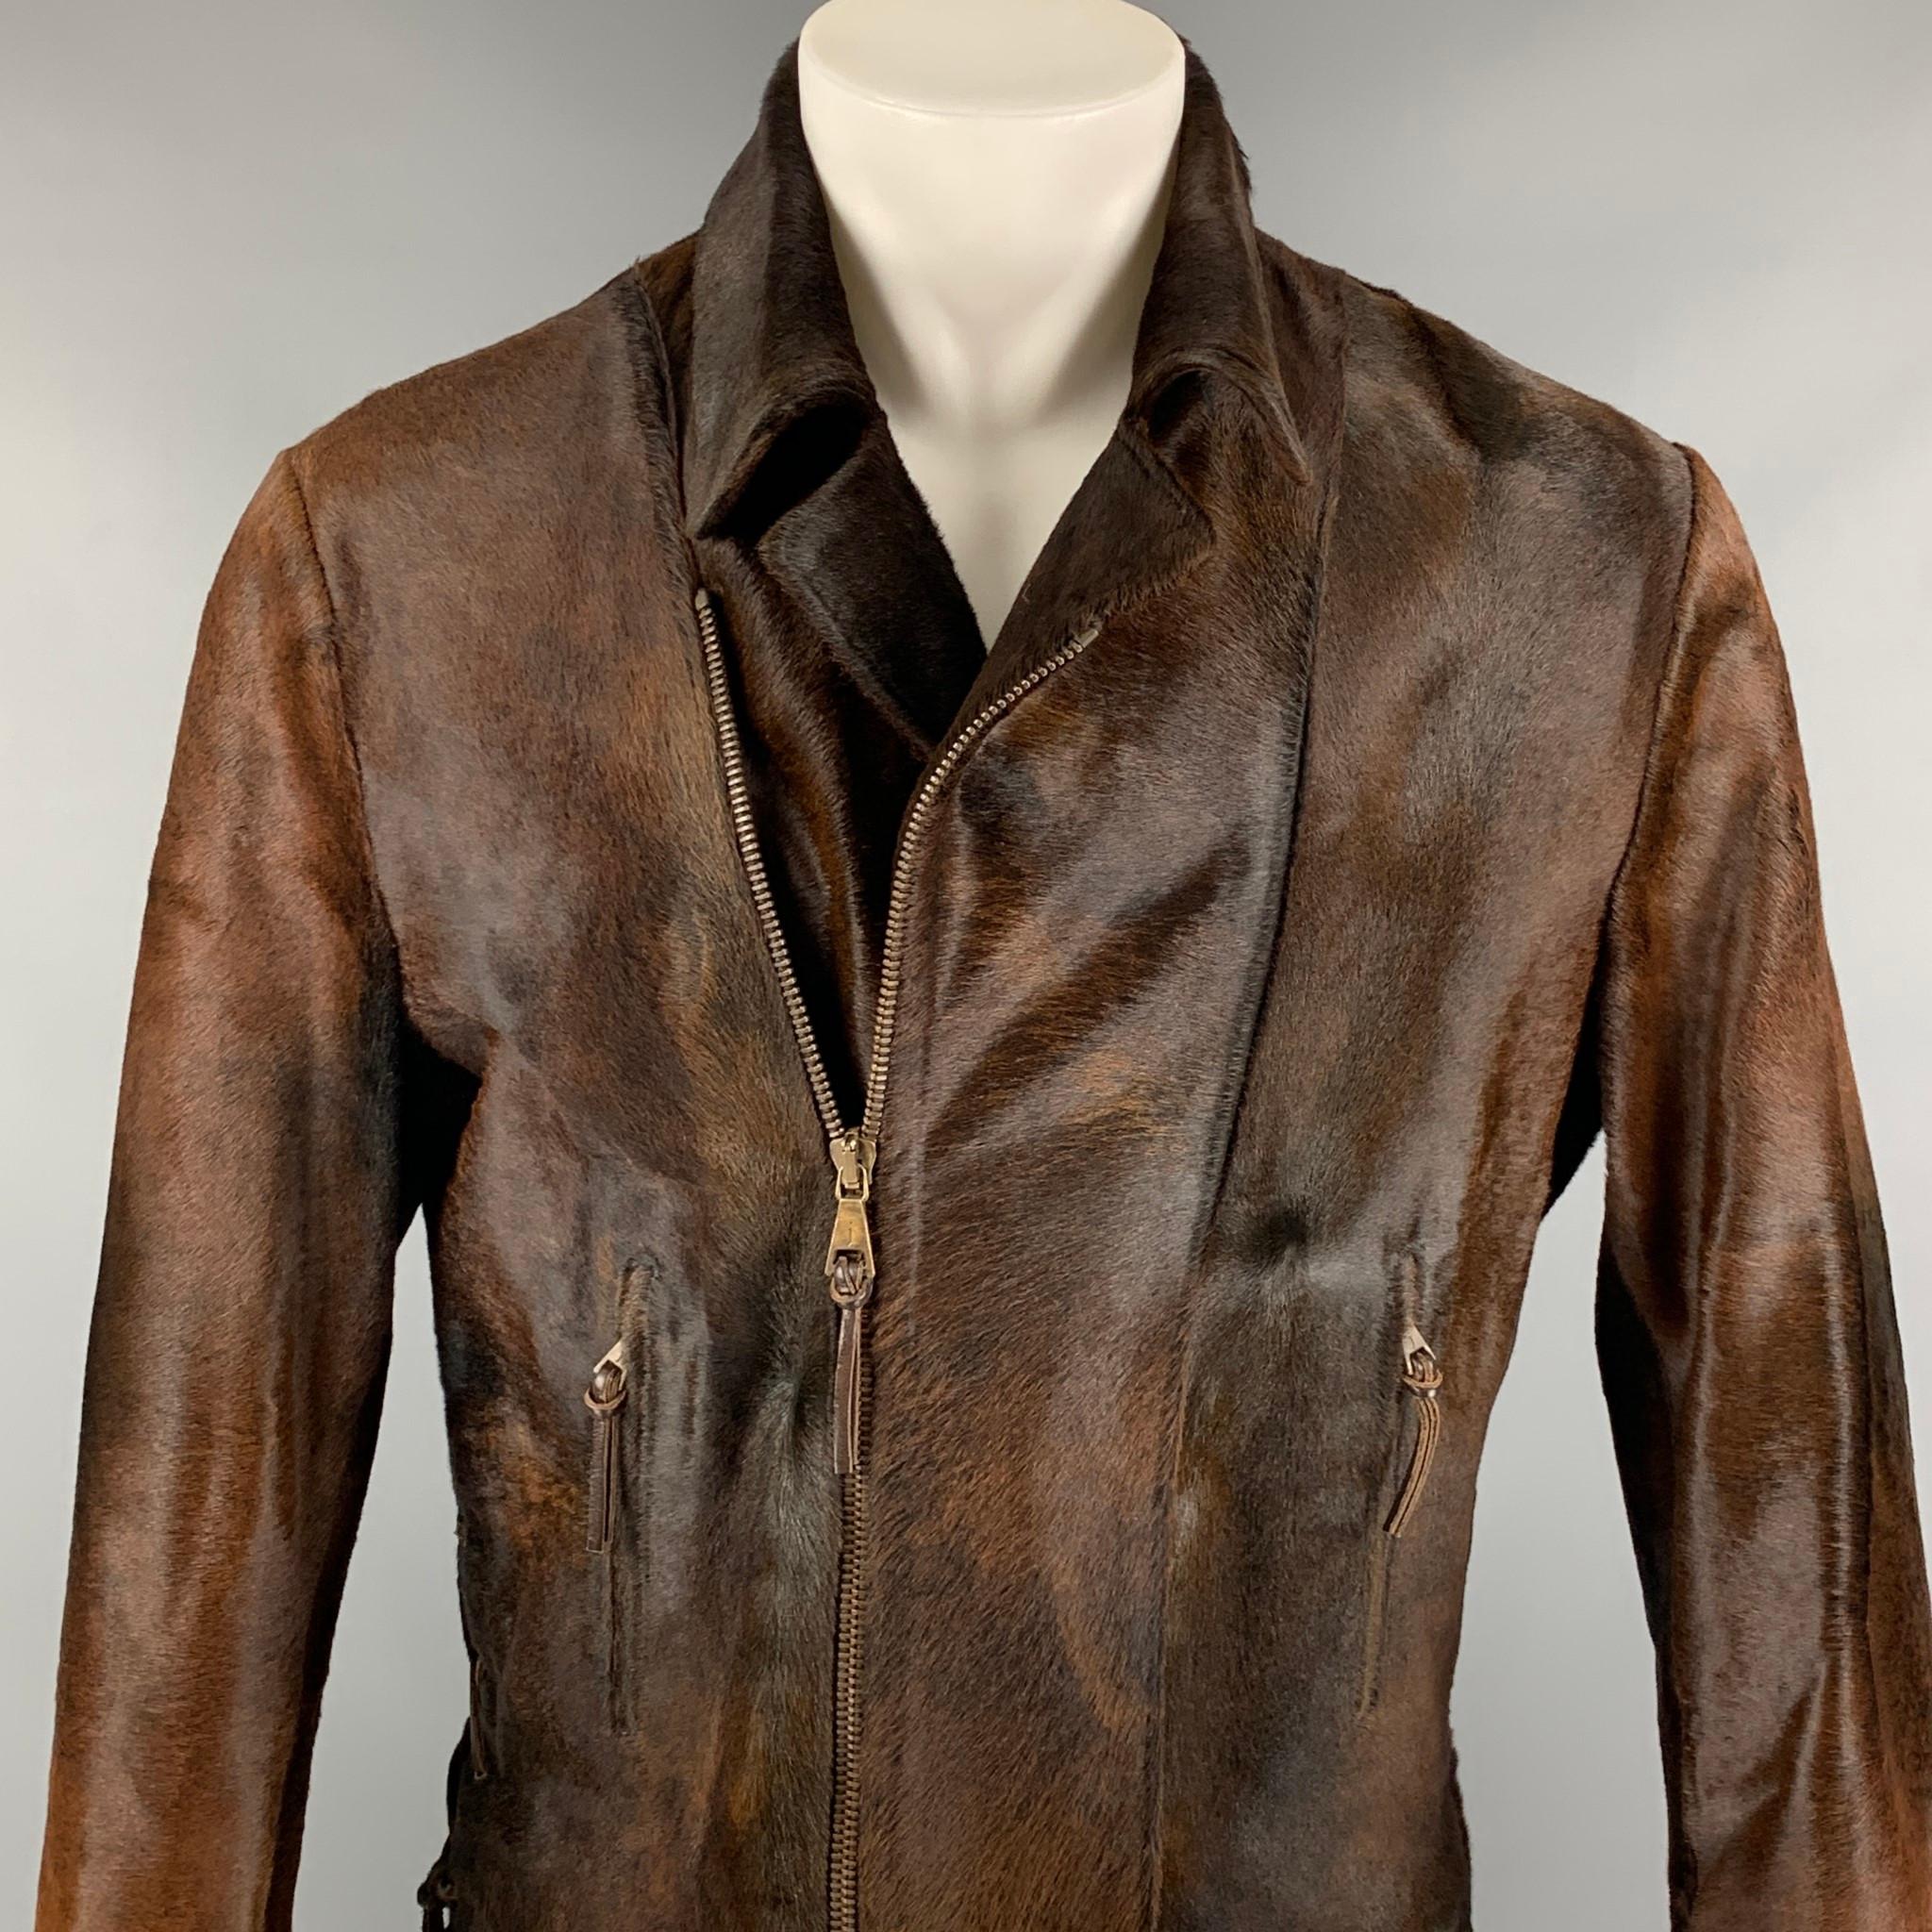 JOHN VARVATOS jacket comes in a brown calf hair with a full liner featuring side leather strap tie details, front pockets, zipper sleeves, and a full zip up closure. 

Very Good Pre-Owned Condition.
Marked: 50
Original Retail Price: